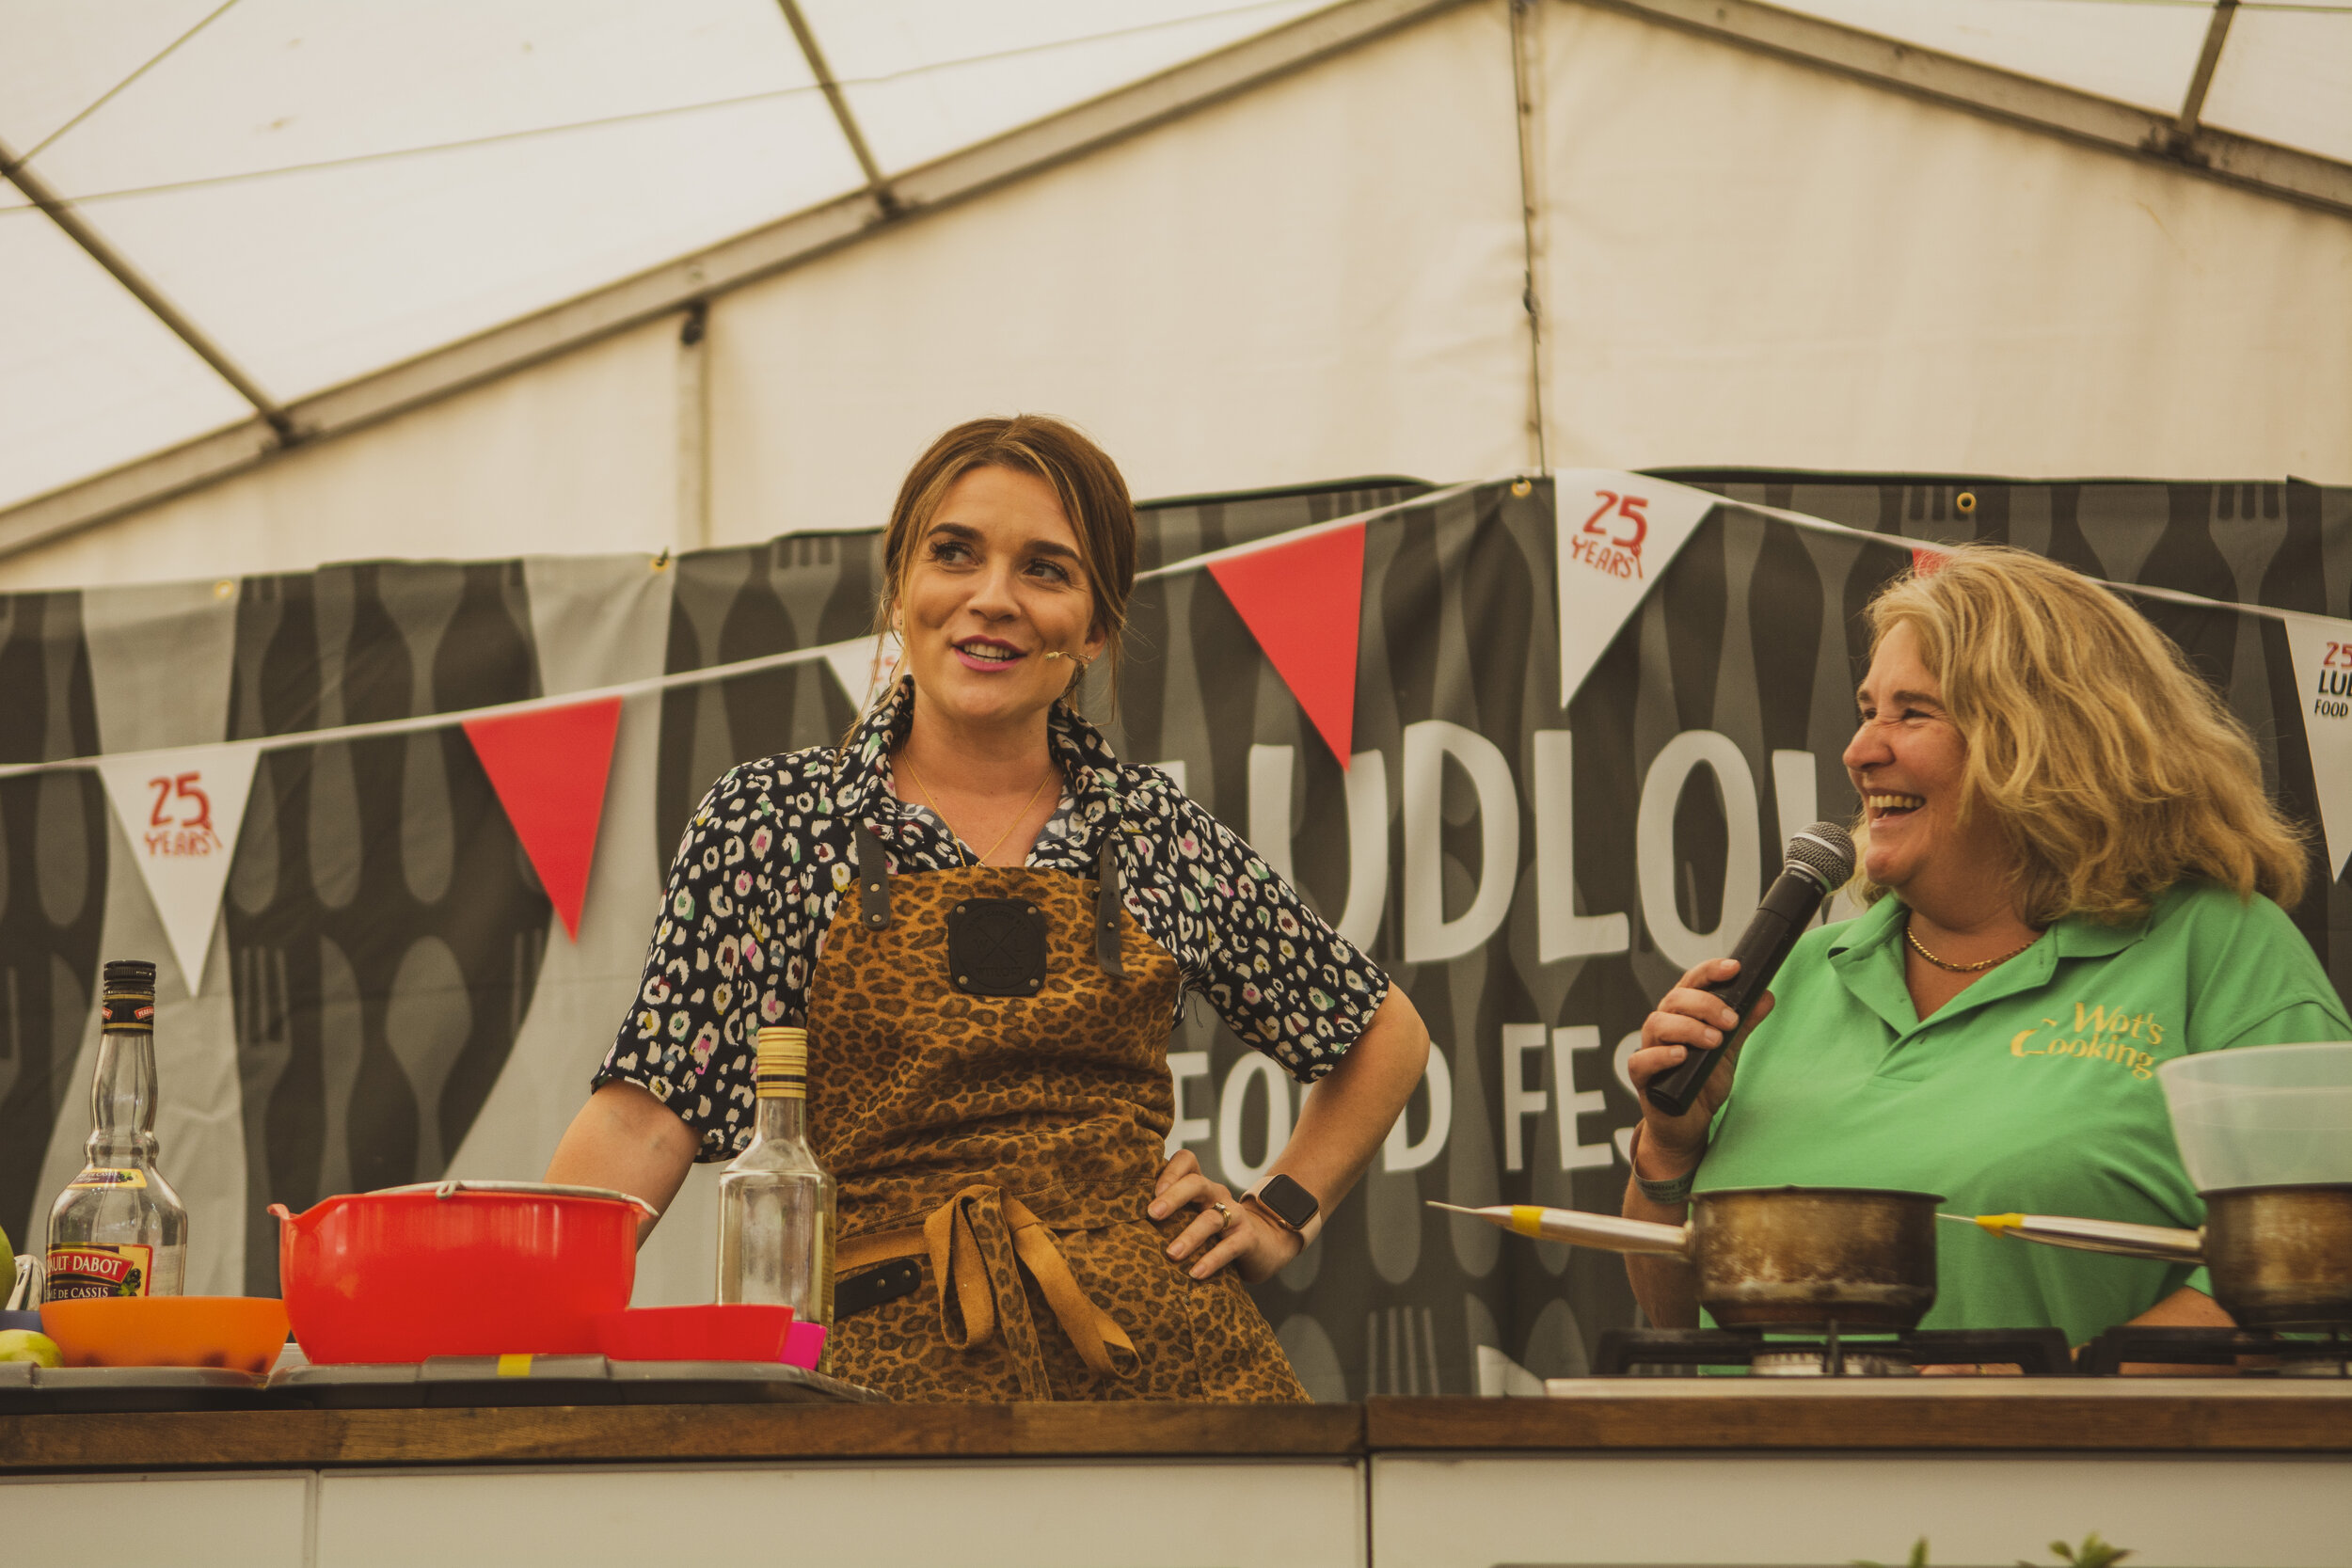 Ludlow Food Festival is back this September